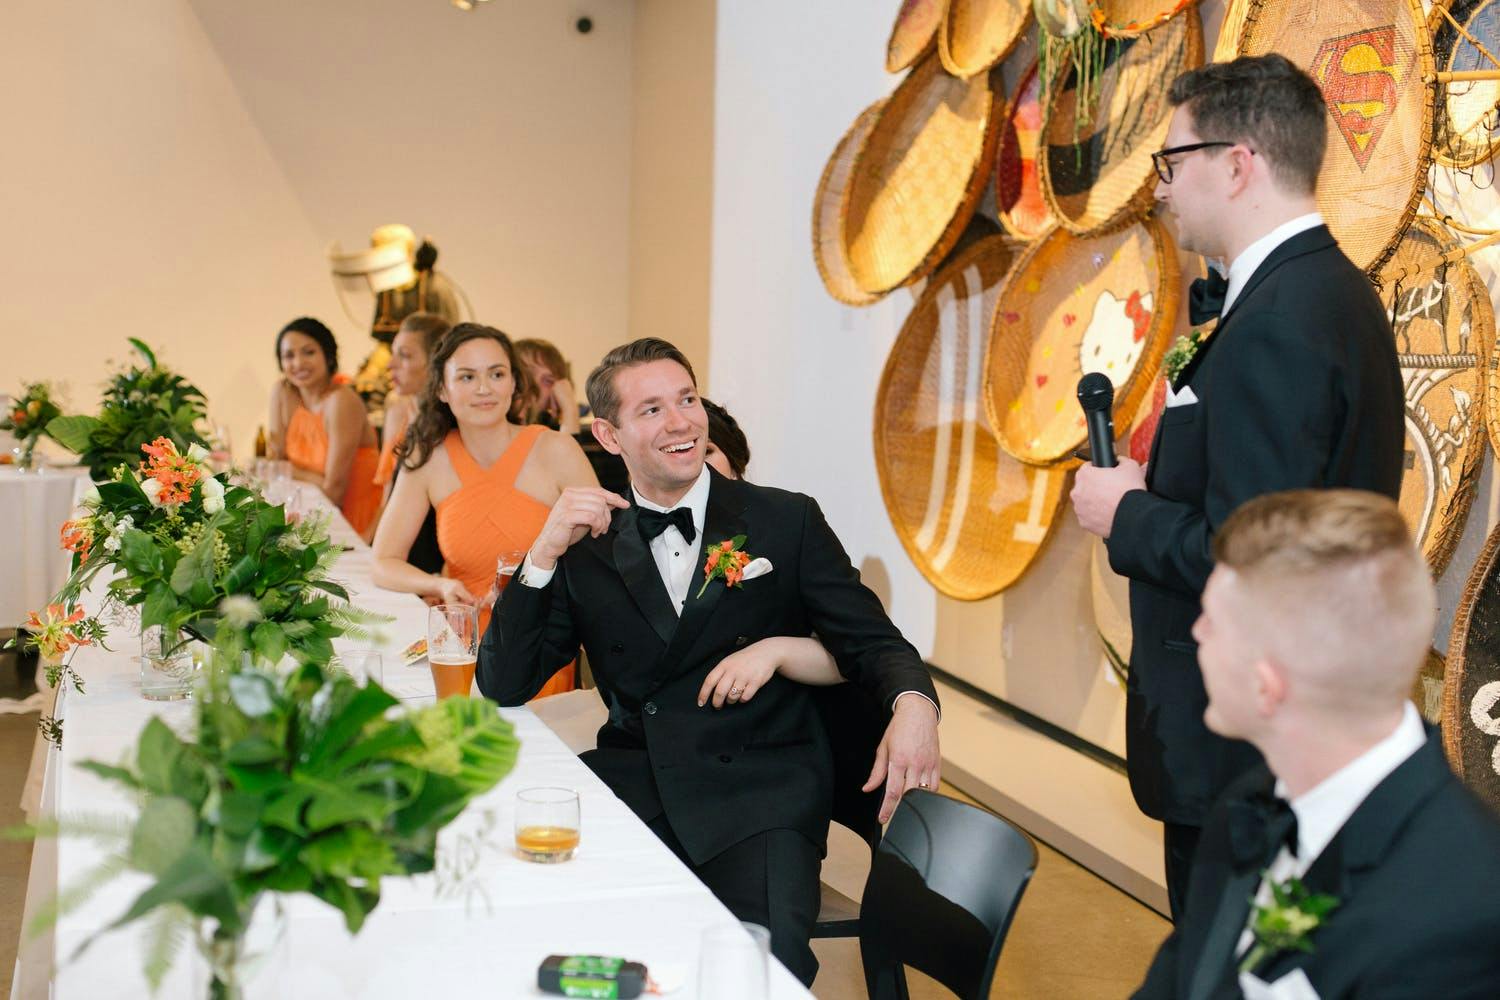 Wedding Party Reception Table at Contemporary Museum. Bridesmaids Wear Orange to Match the Orange-Accented Greenery Centerpieces | PartySlate